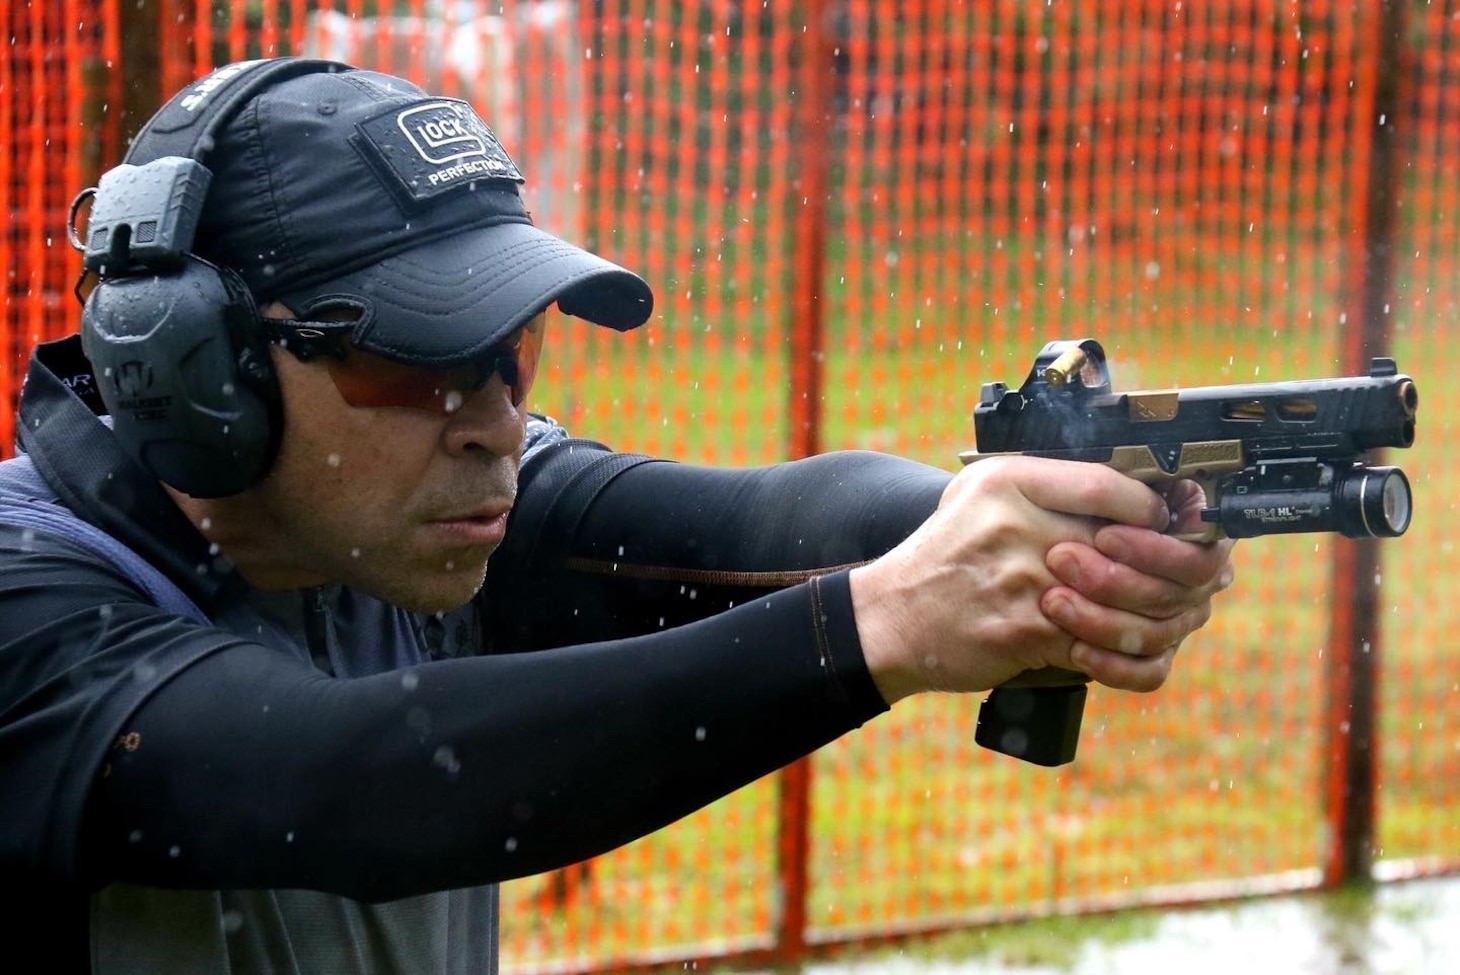 Hospital Corpsman 1st Class Axel Narvaez, a native of Vega Baja, Puerto Rico, competes under the carry optics division for pistols during the Caribbean Open 2022, Feb. 6, 2022.